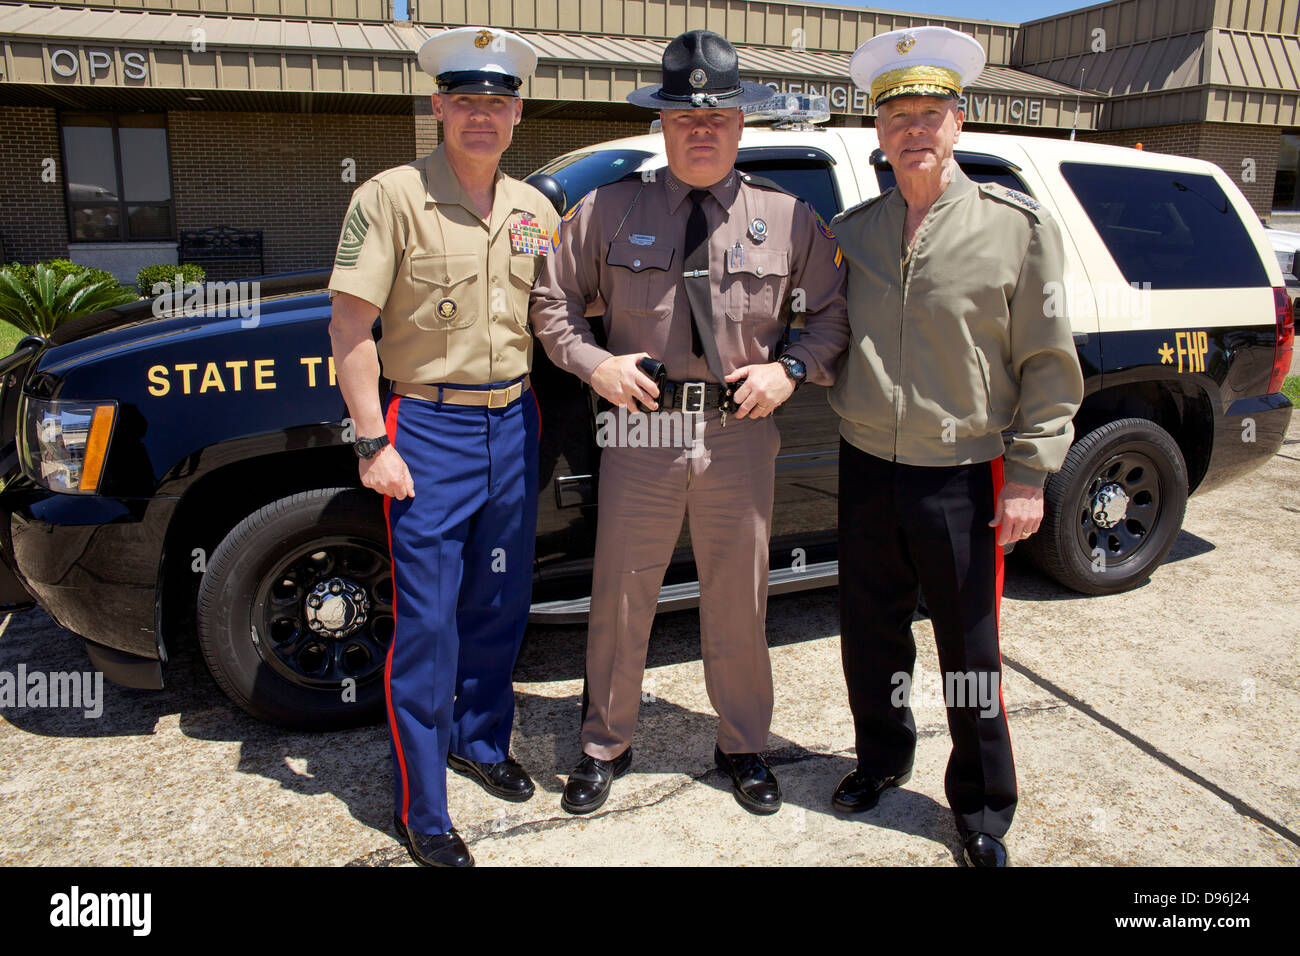 The 35th Commandant of the Marine Corps, Gen. James F. Amos, right, and 17th Sergeant Major of the Marine Corps, Sgt. Maj. Micheal P. Barrett, left, pose for a photo a Florida Highway Patrol officer after visiting the Marine Fighter Attack Training Squadr Stock Photo